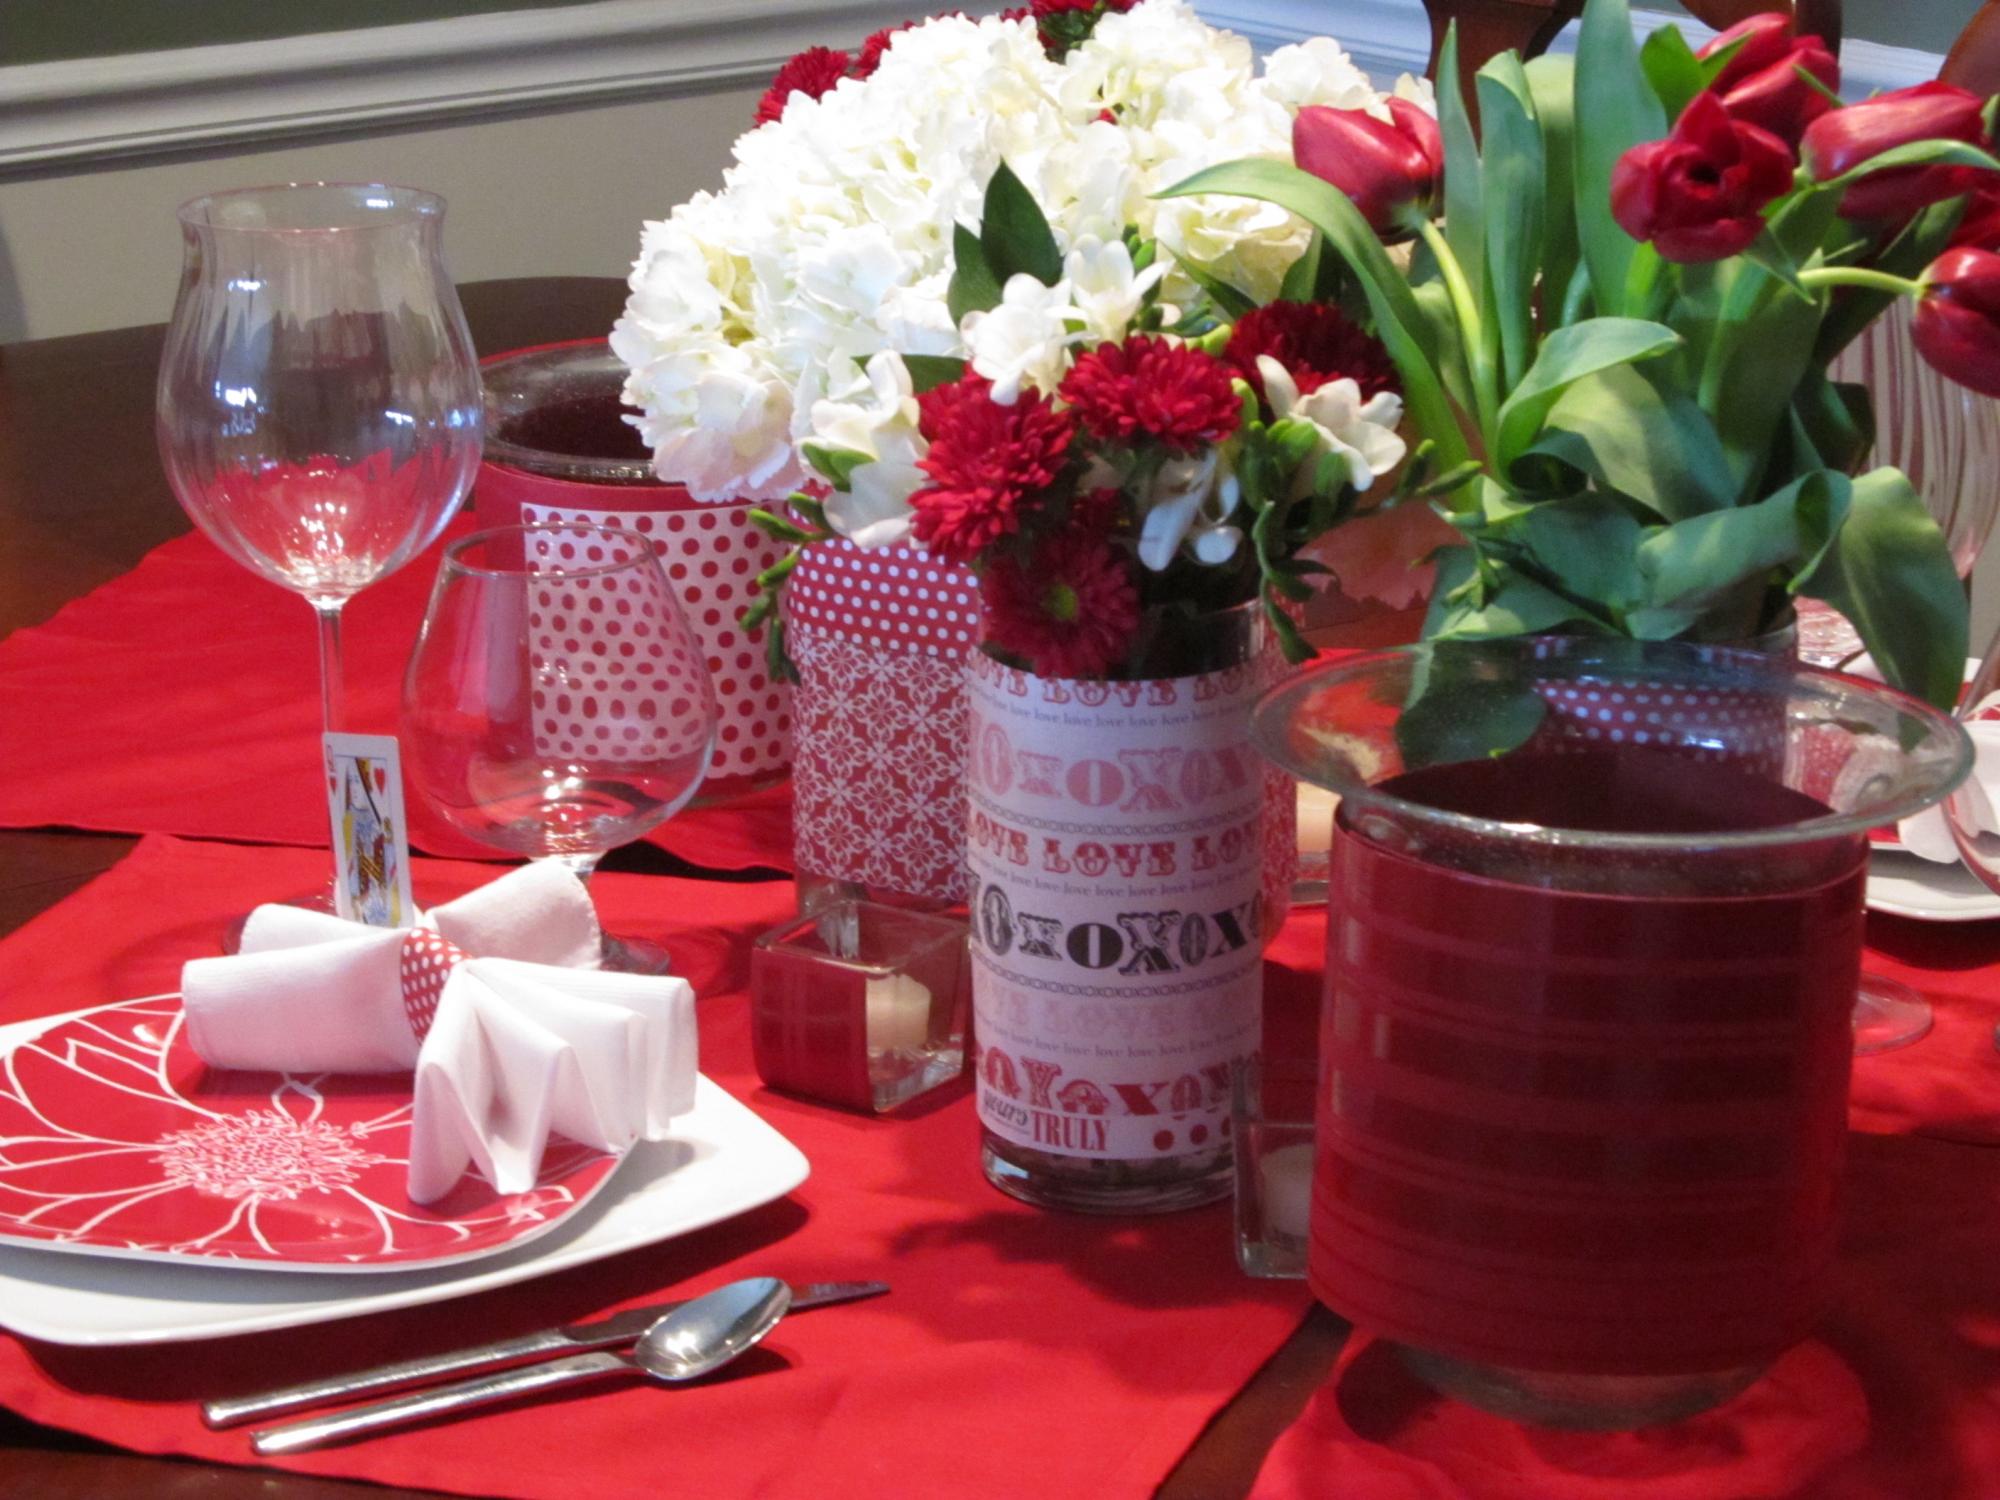 A red tablecloth for Valentine's Day decor on the table.